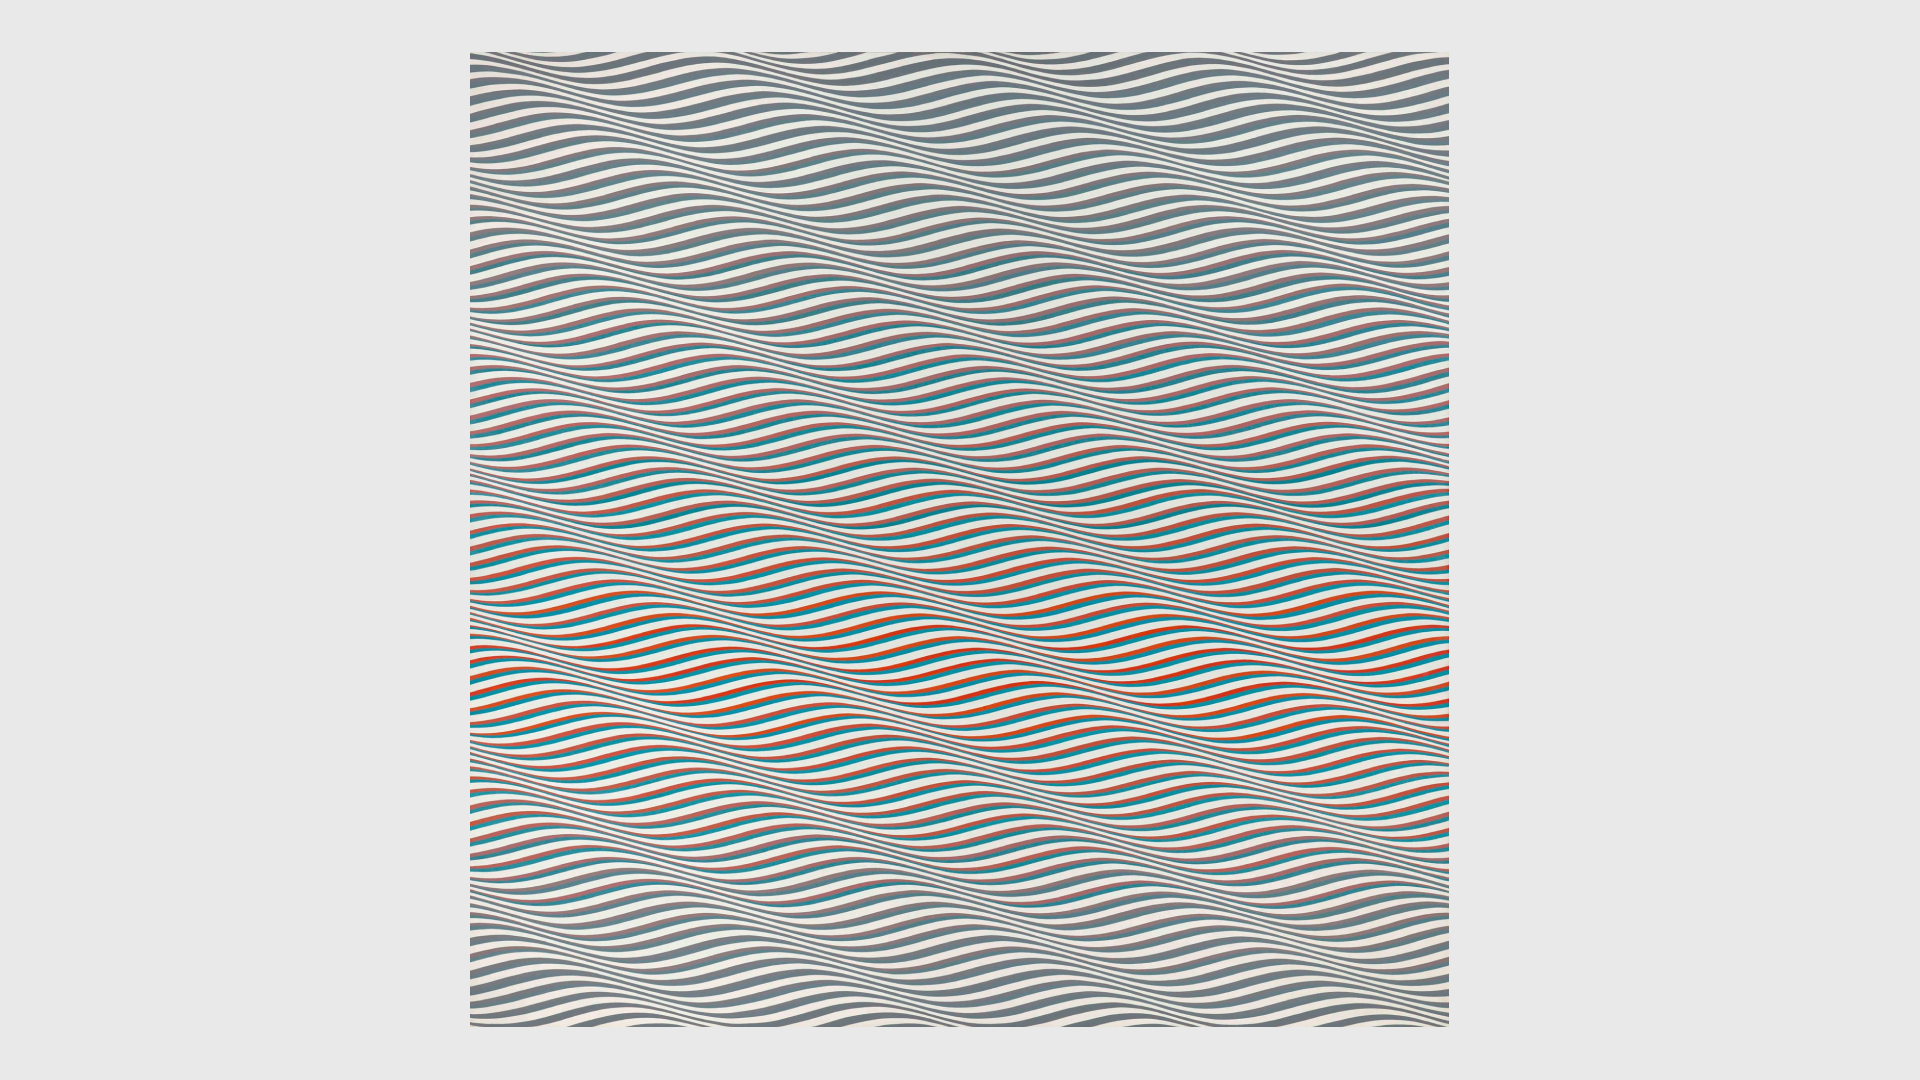 A painting by Bridget Riley, titled Cataract 3, dated 1967.